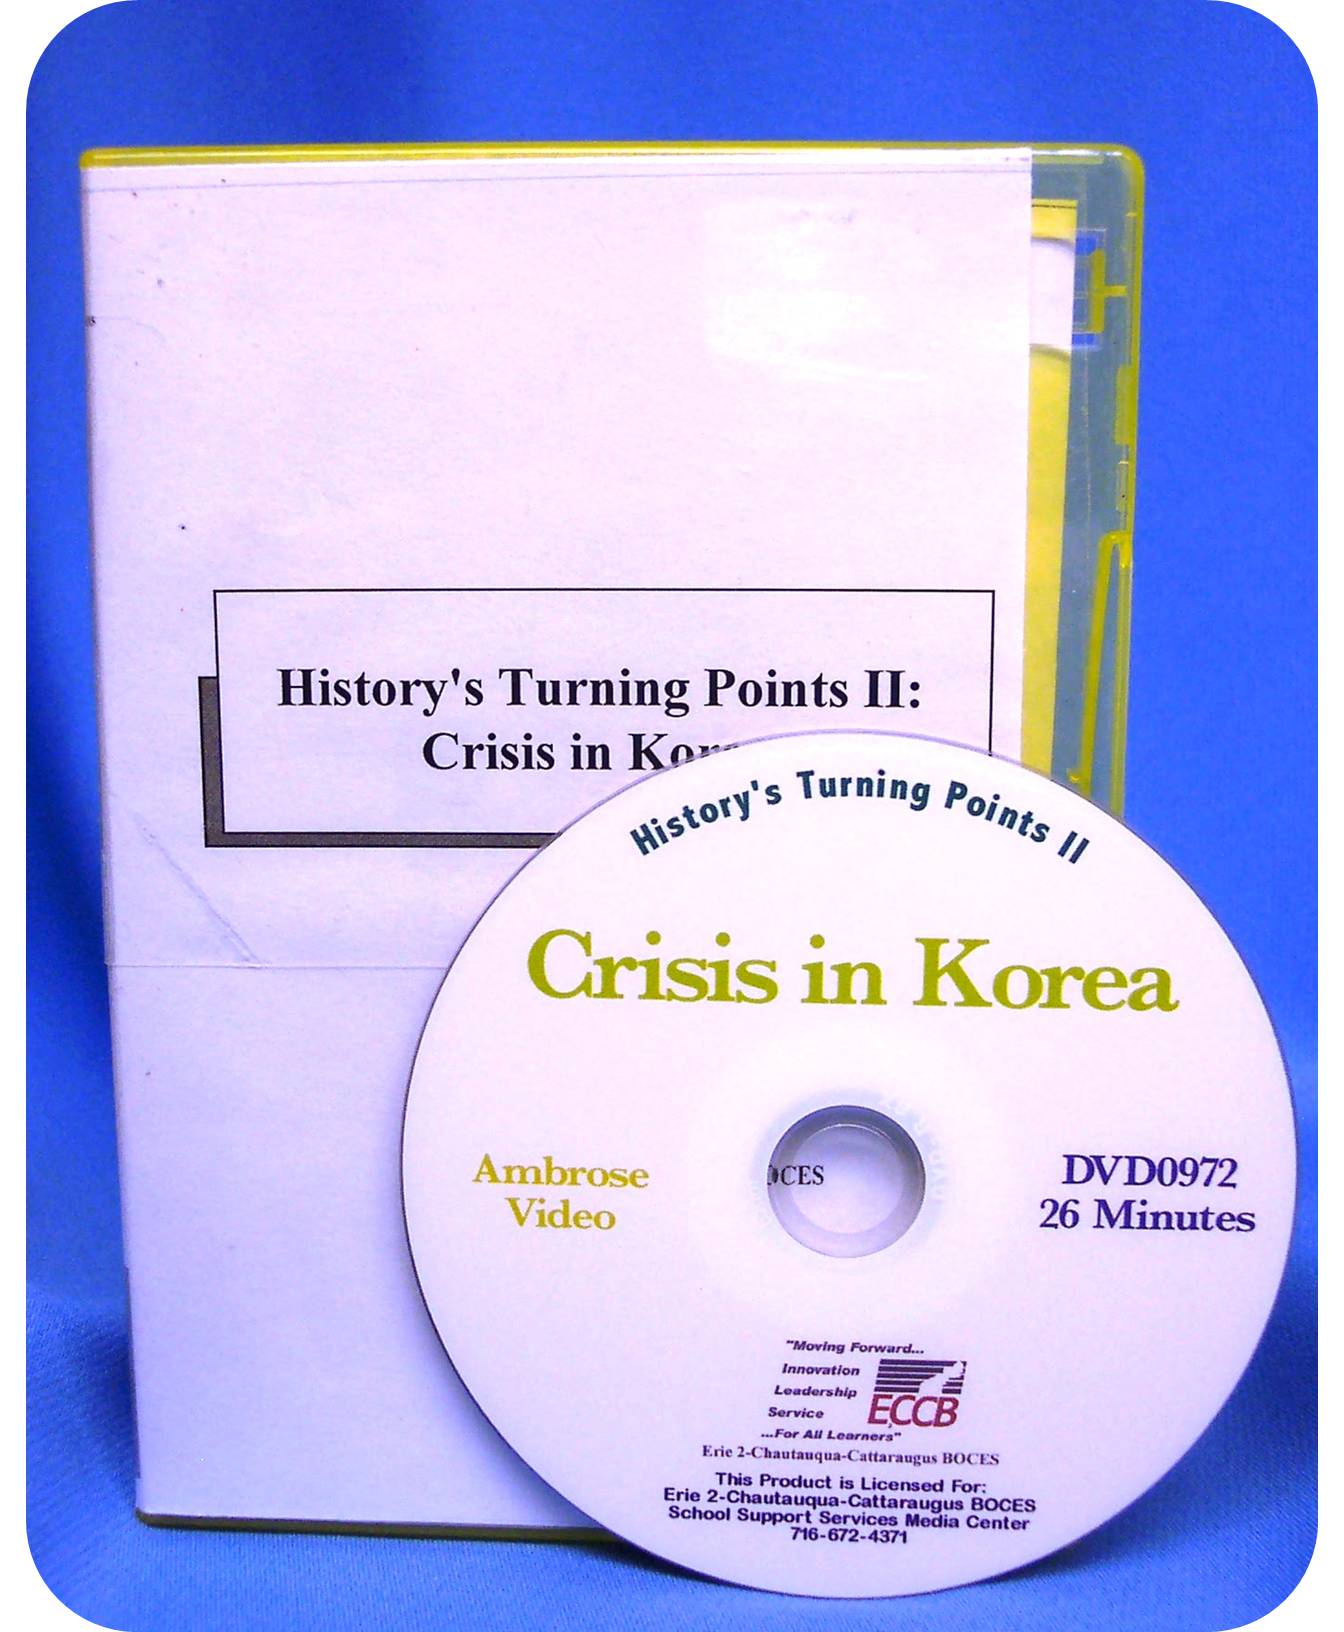 History's Turning Points II: Crisis in Korea